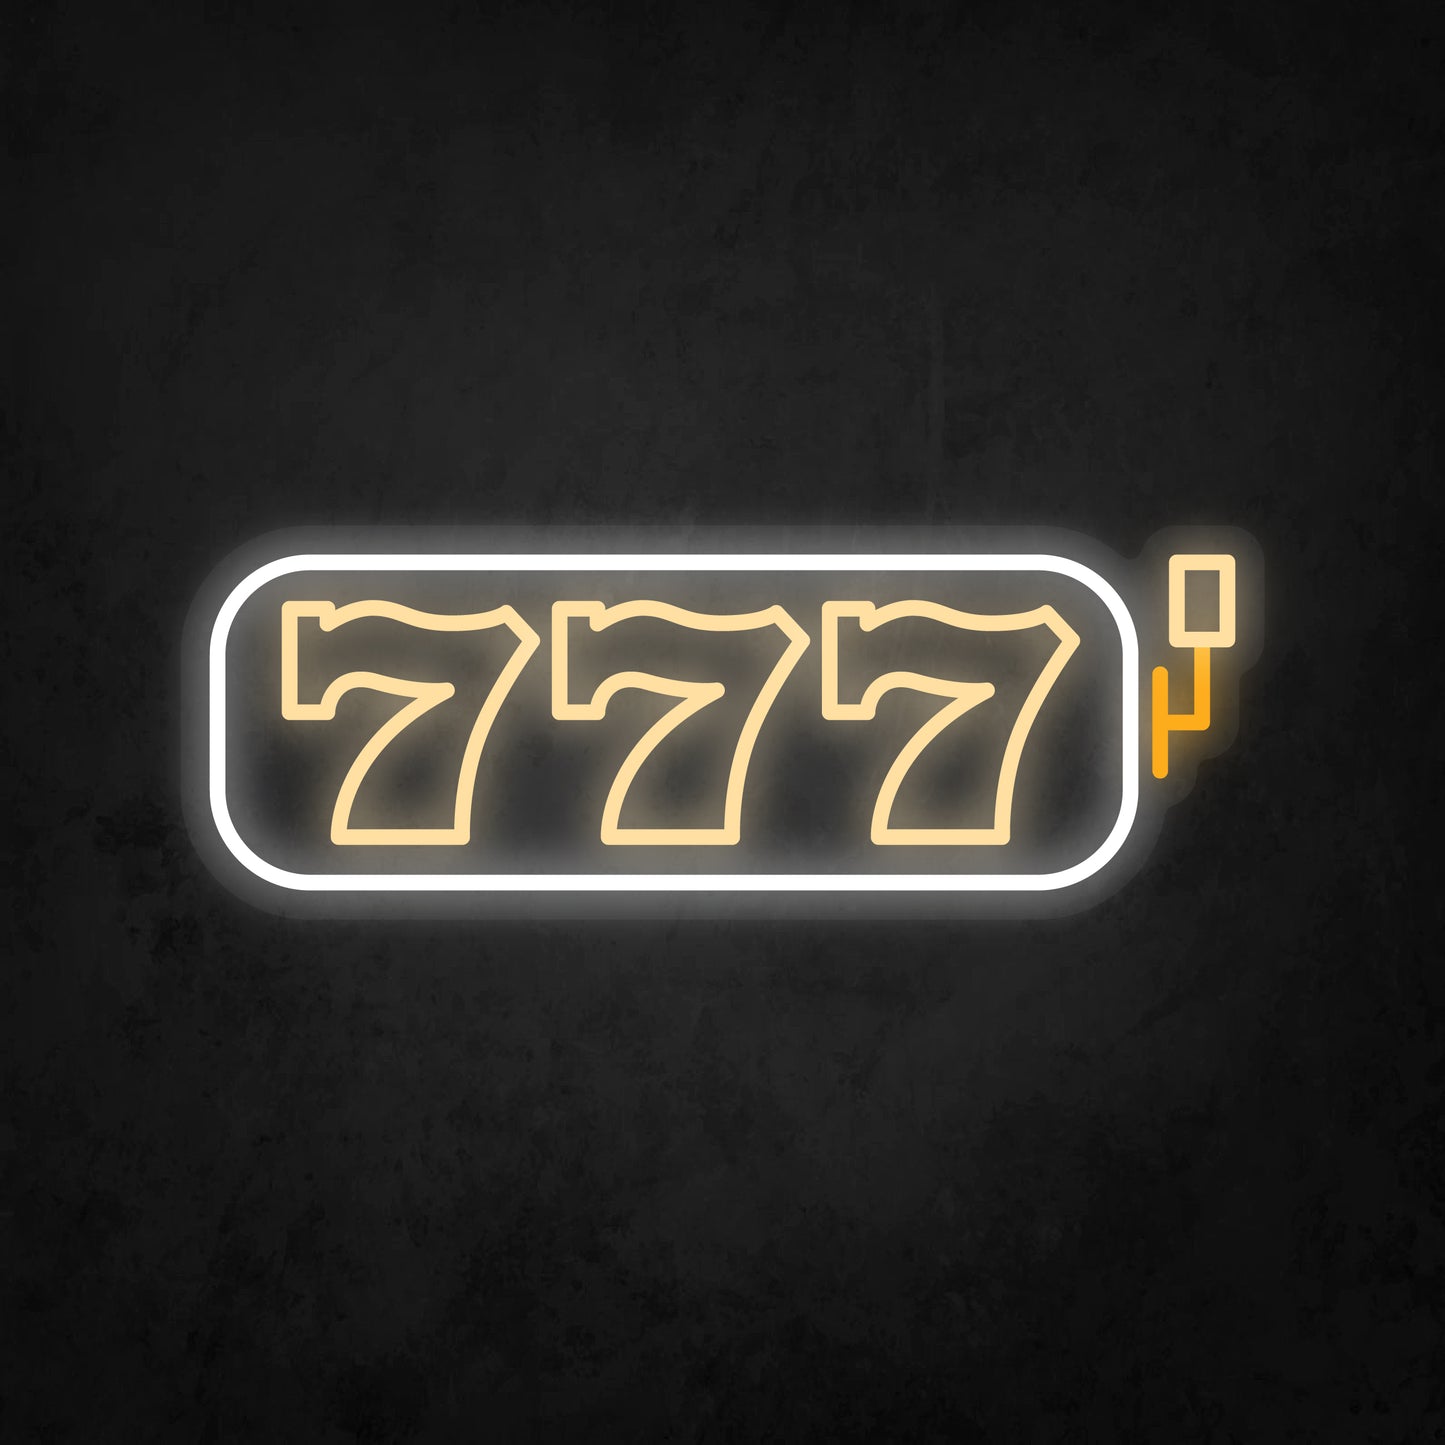 LED Neon Sign - 777